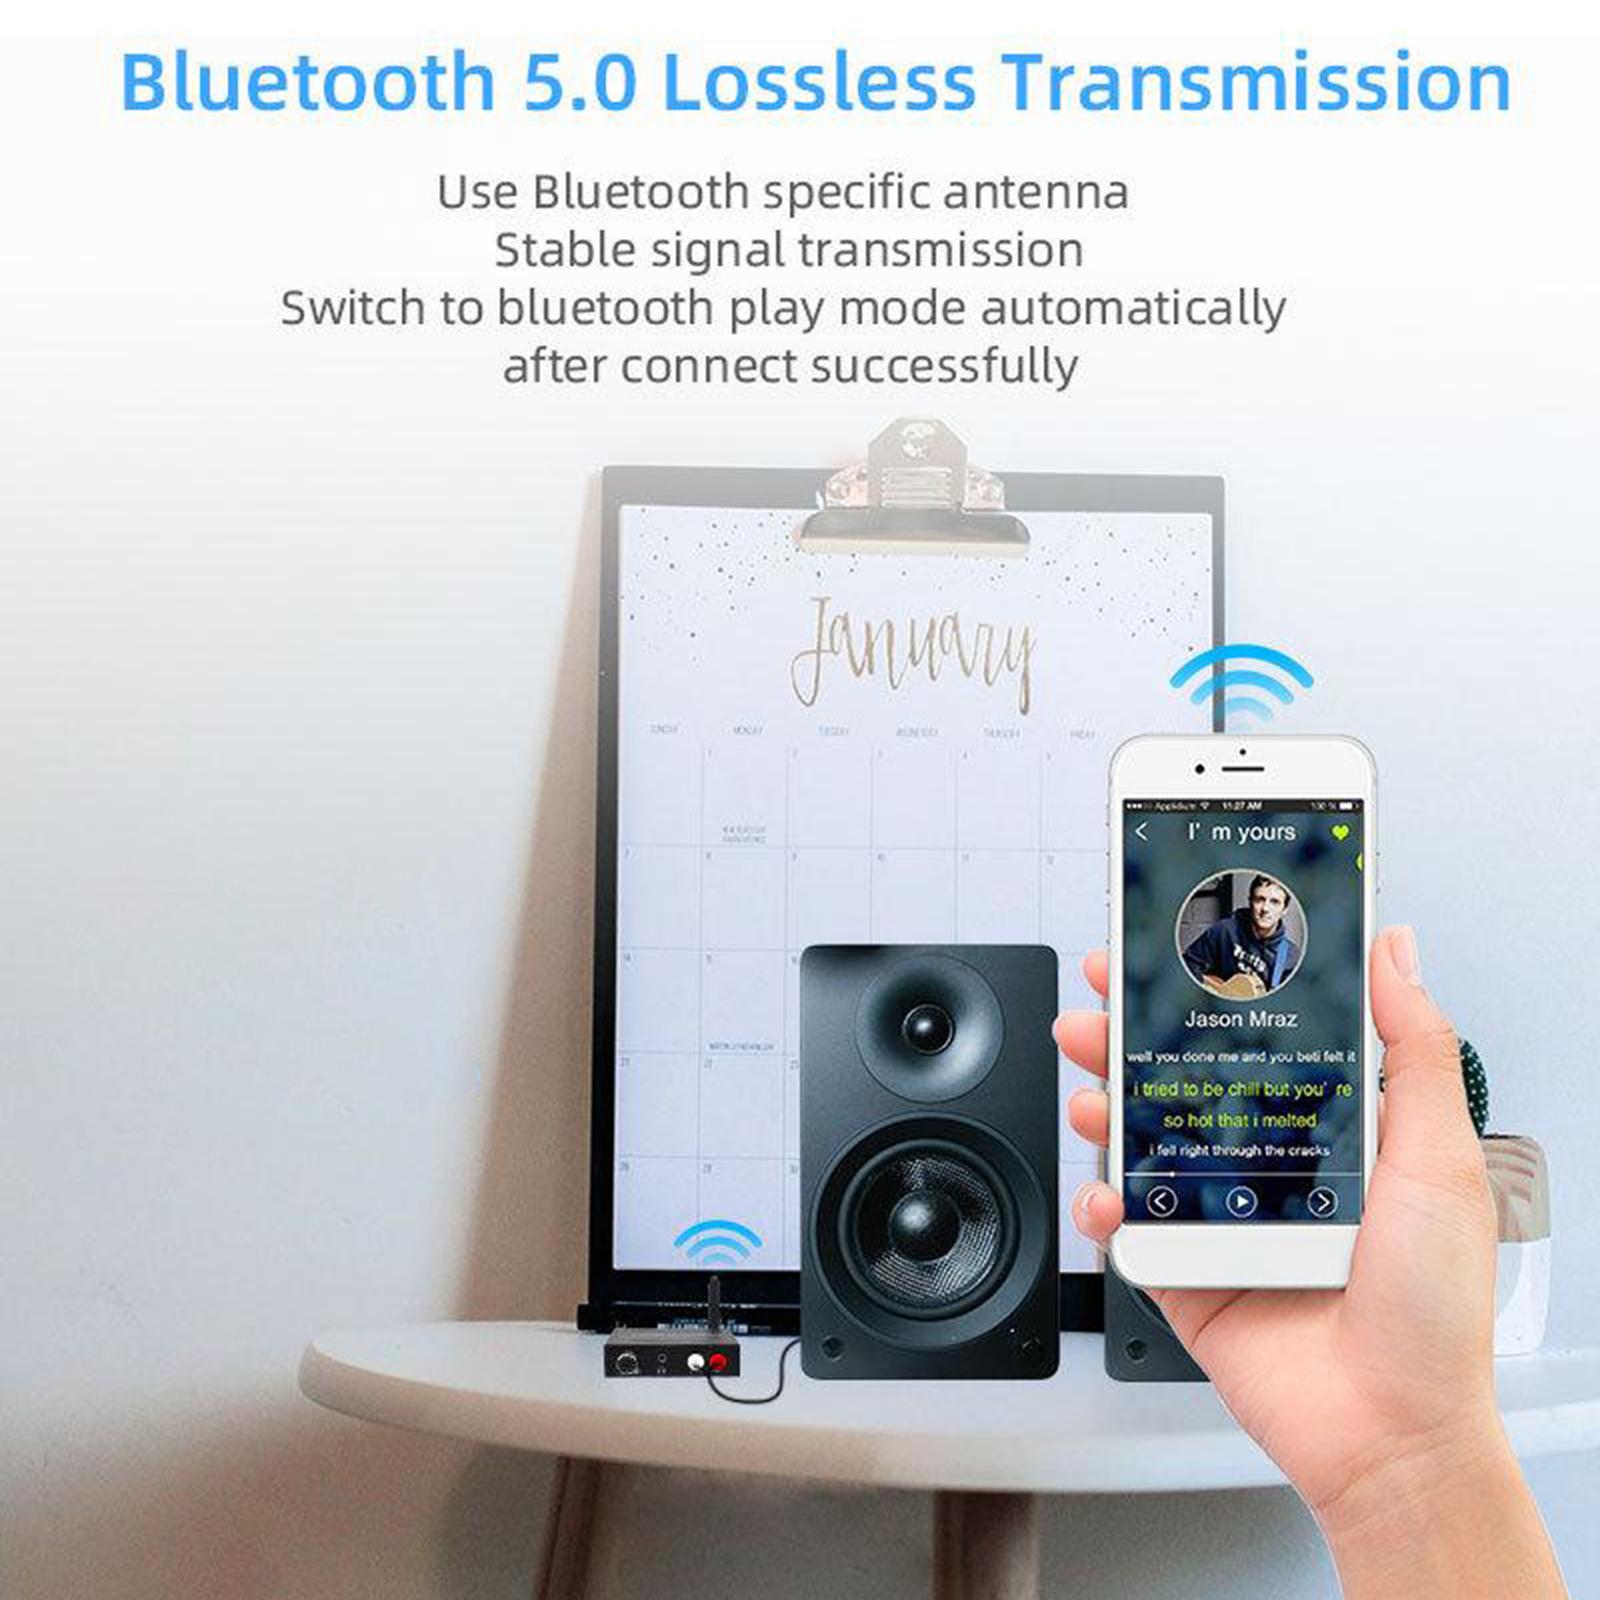 192kHz DAC Converter, Volume Adjustable, Bluetooth 5.0 Receiver, Digital Optical Coaxial to Analog Stereo Audio L/R RCA 3.5mm Jack Audio Adapter